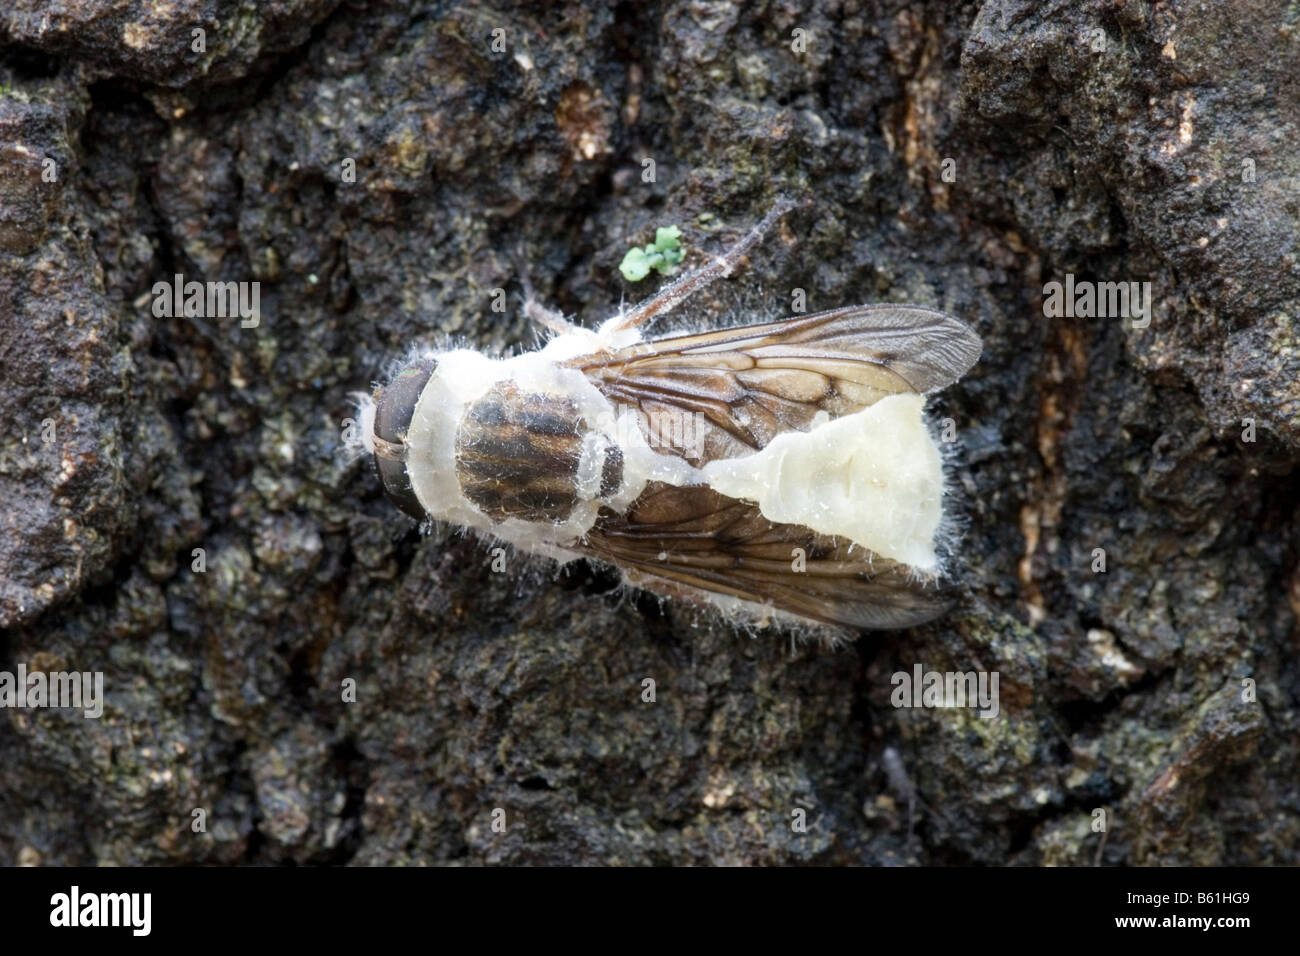 Fly with fungal infection Stock Photo